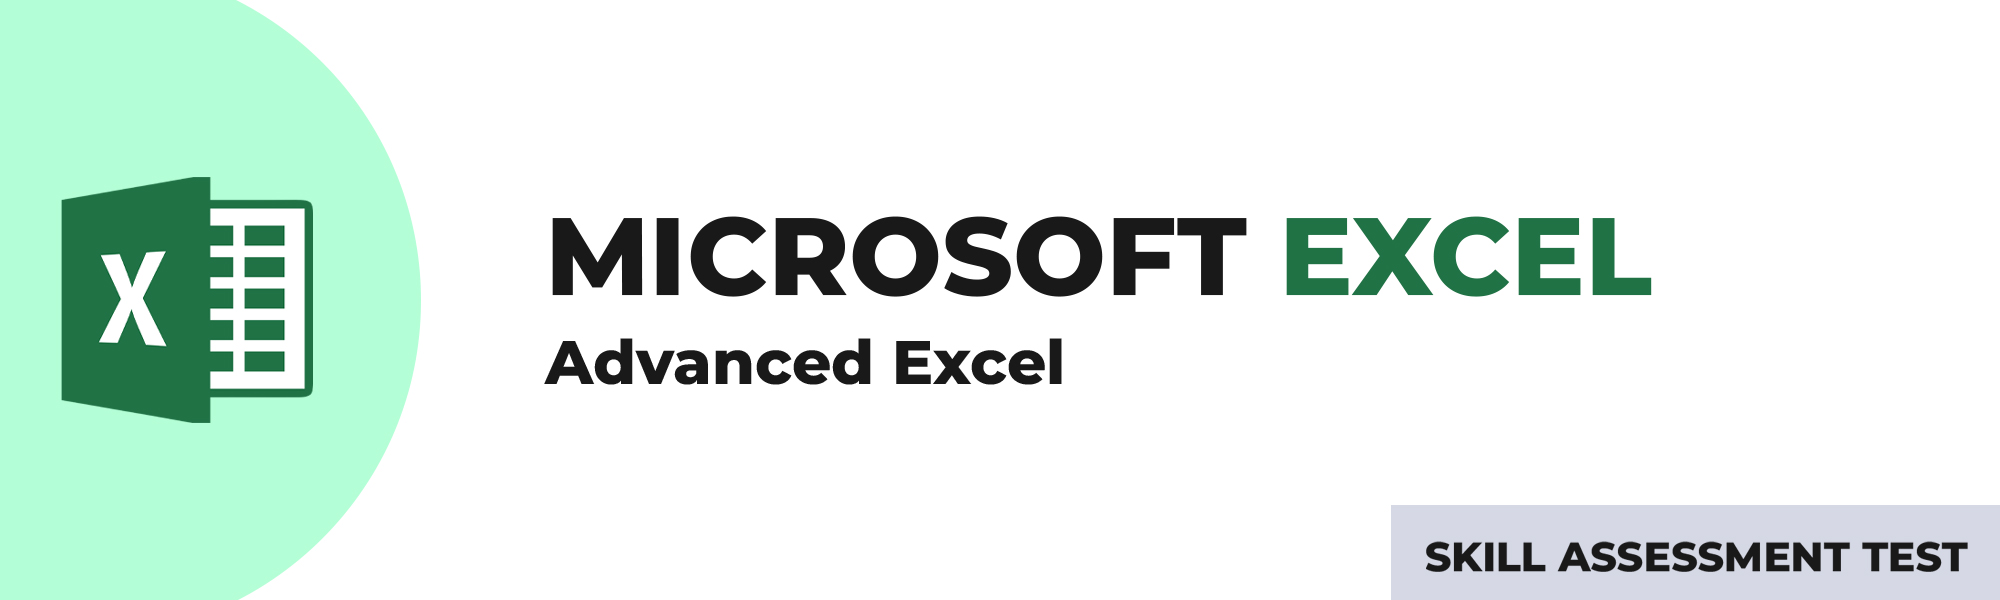 Advanced Excel Course Test in Singapore